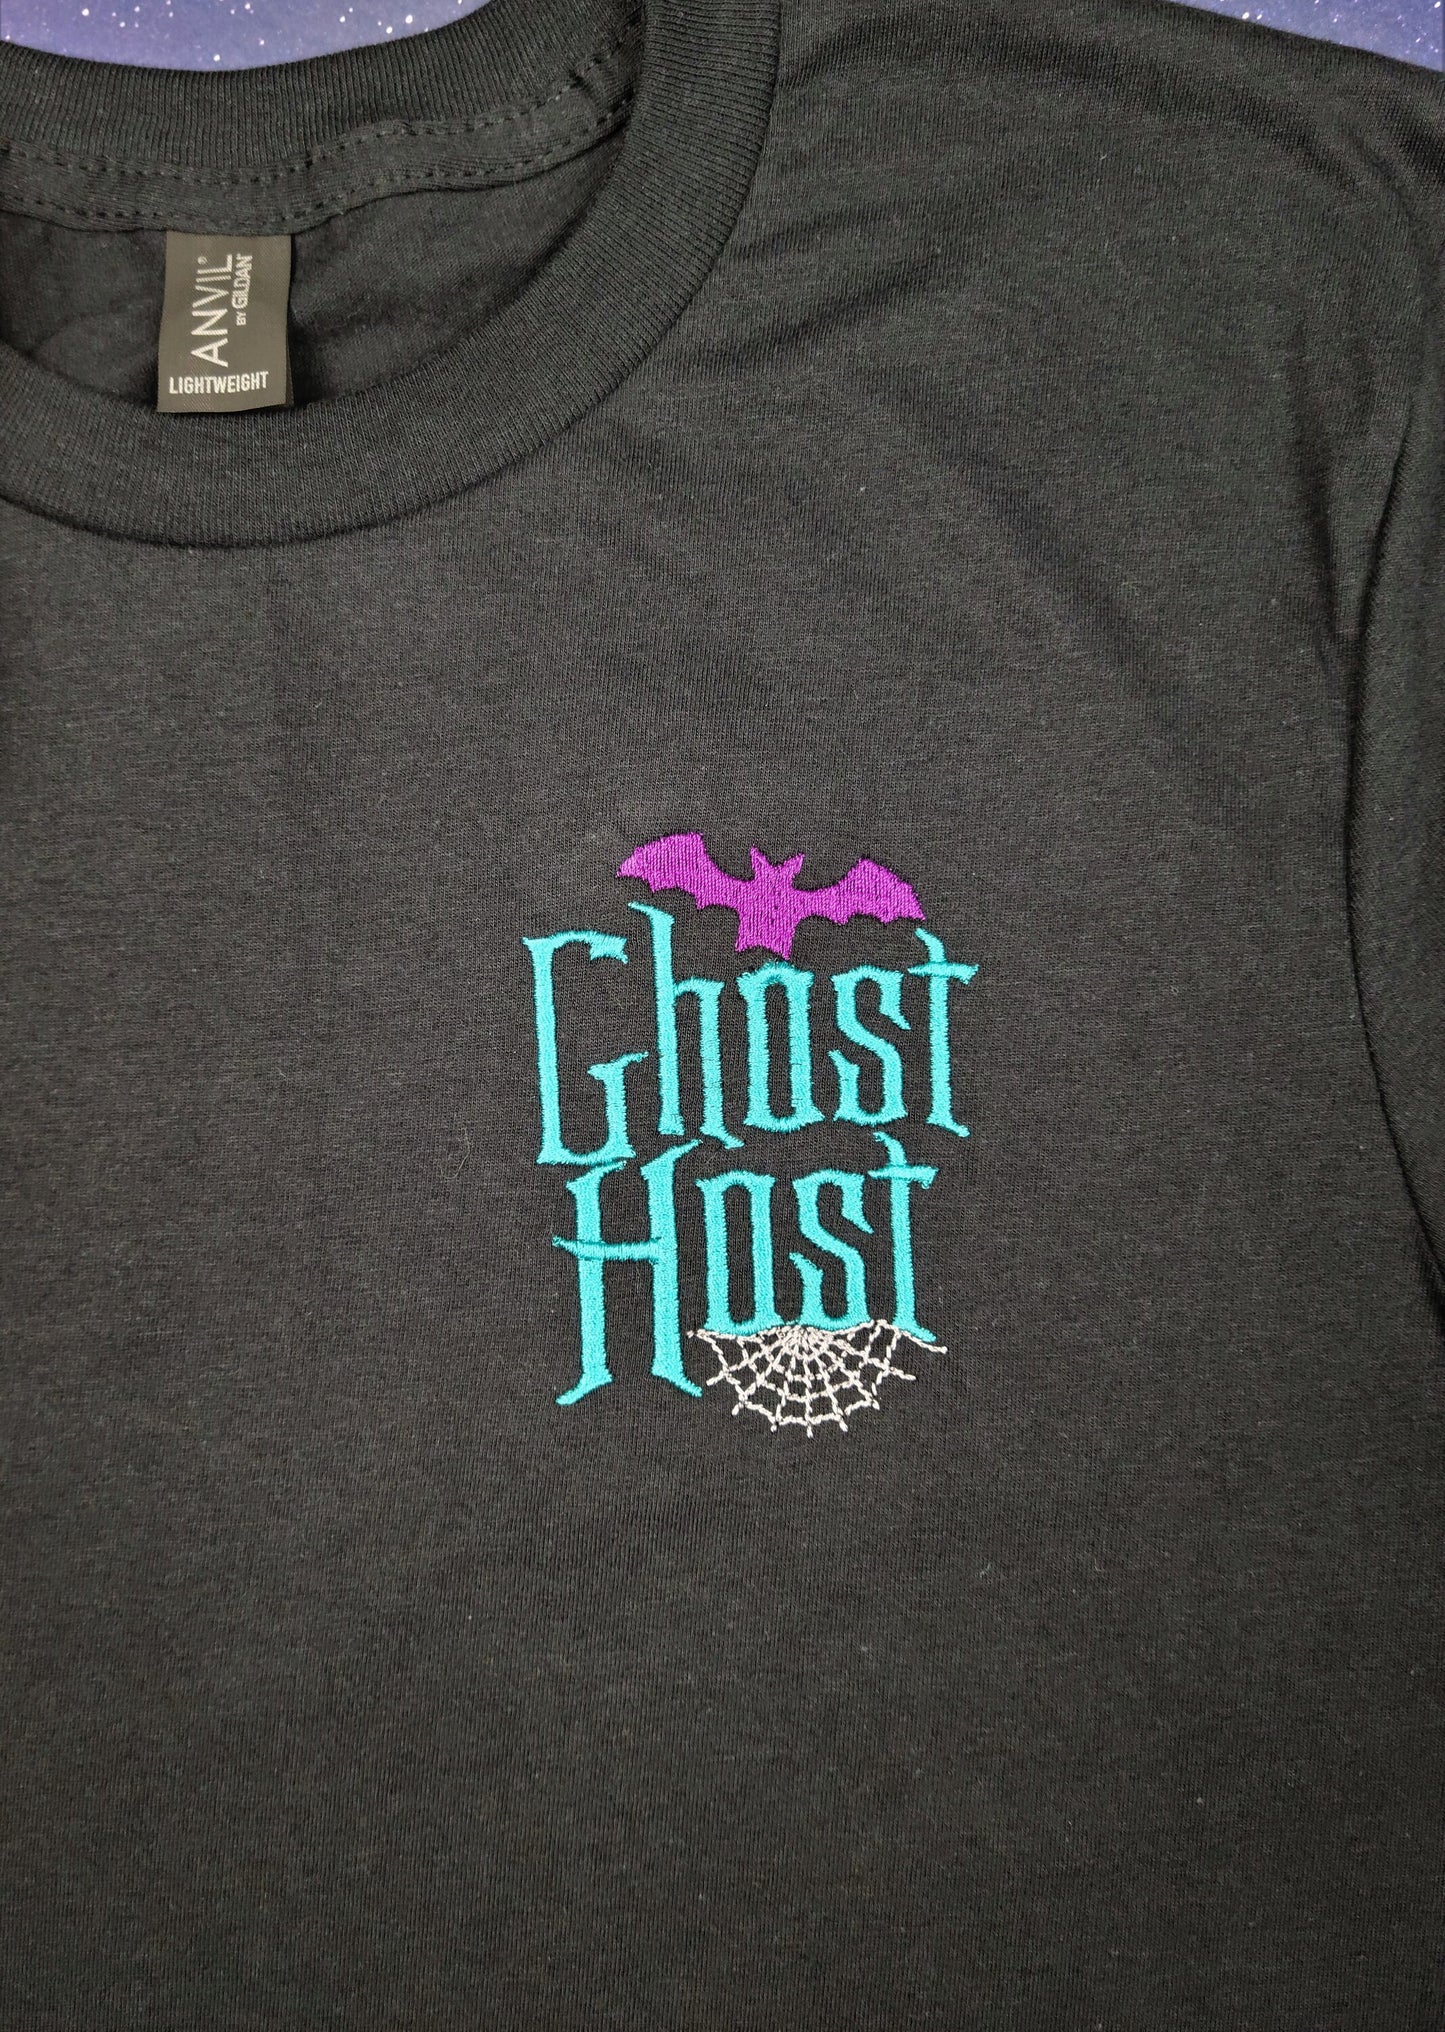 Ghost Host Black Embroidered Tee